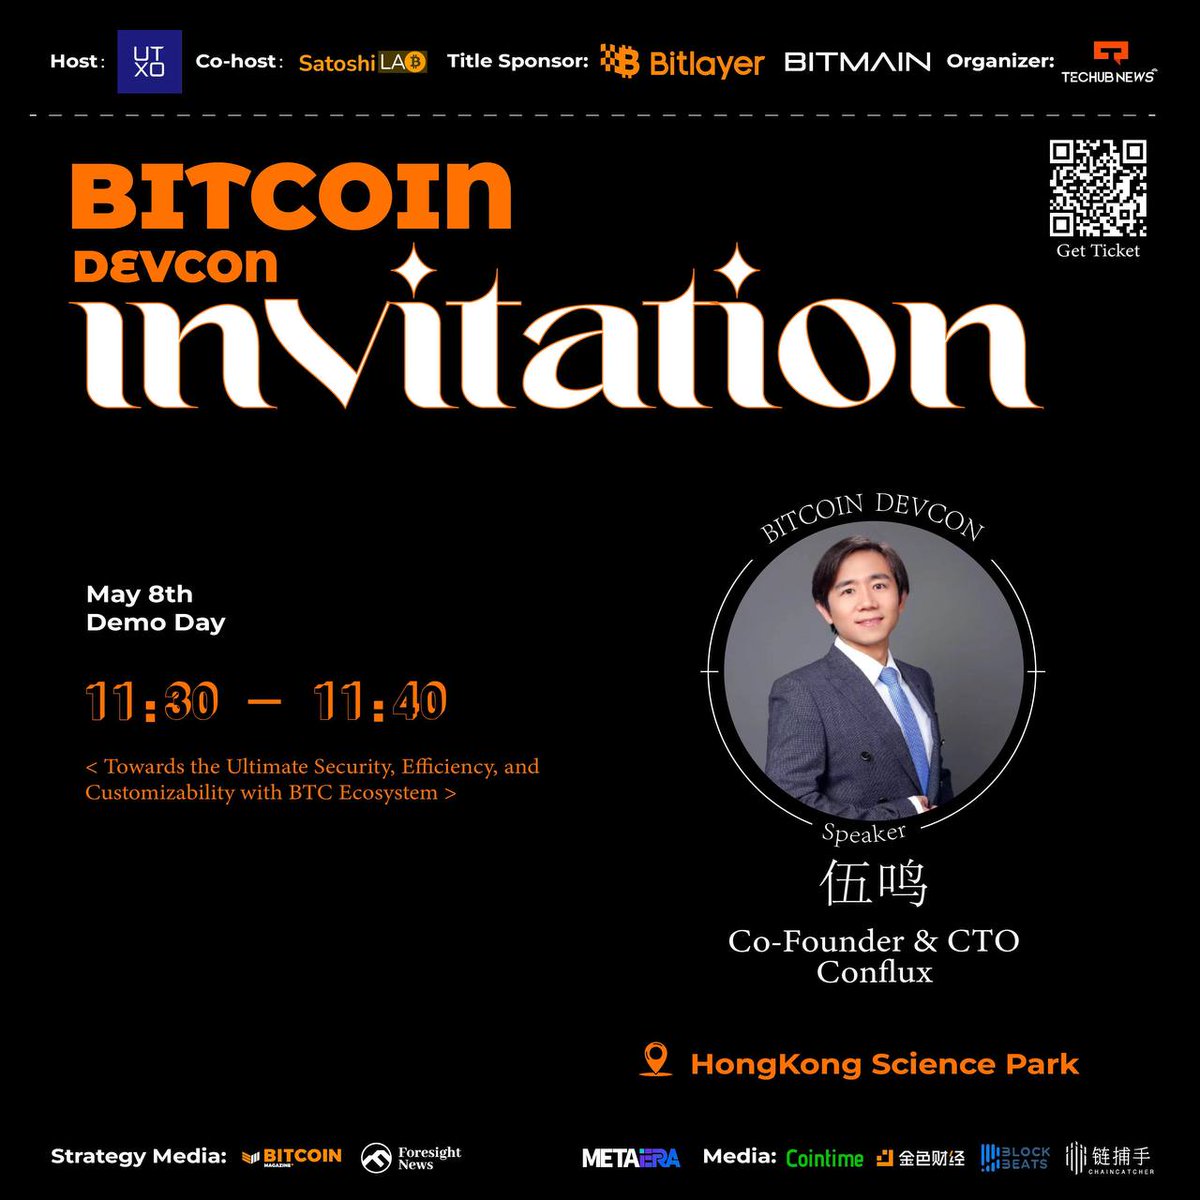 📣 Our co-founder and CTO @spark_ren will be speaking on the future of the BTC ecosystem at @bitcoindevcon #BitcoinDevcon Demo Day! 🔹 Join us on May 8th for an in-depth discussion. Don't miss out! More info and registration: bitcoindevcon.com